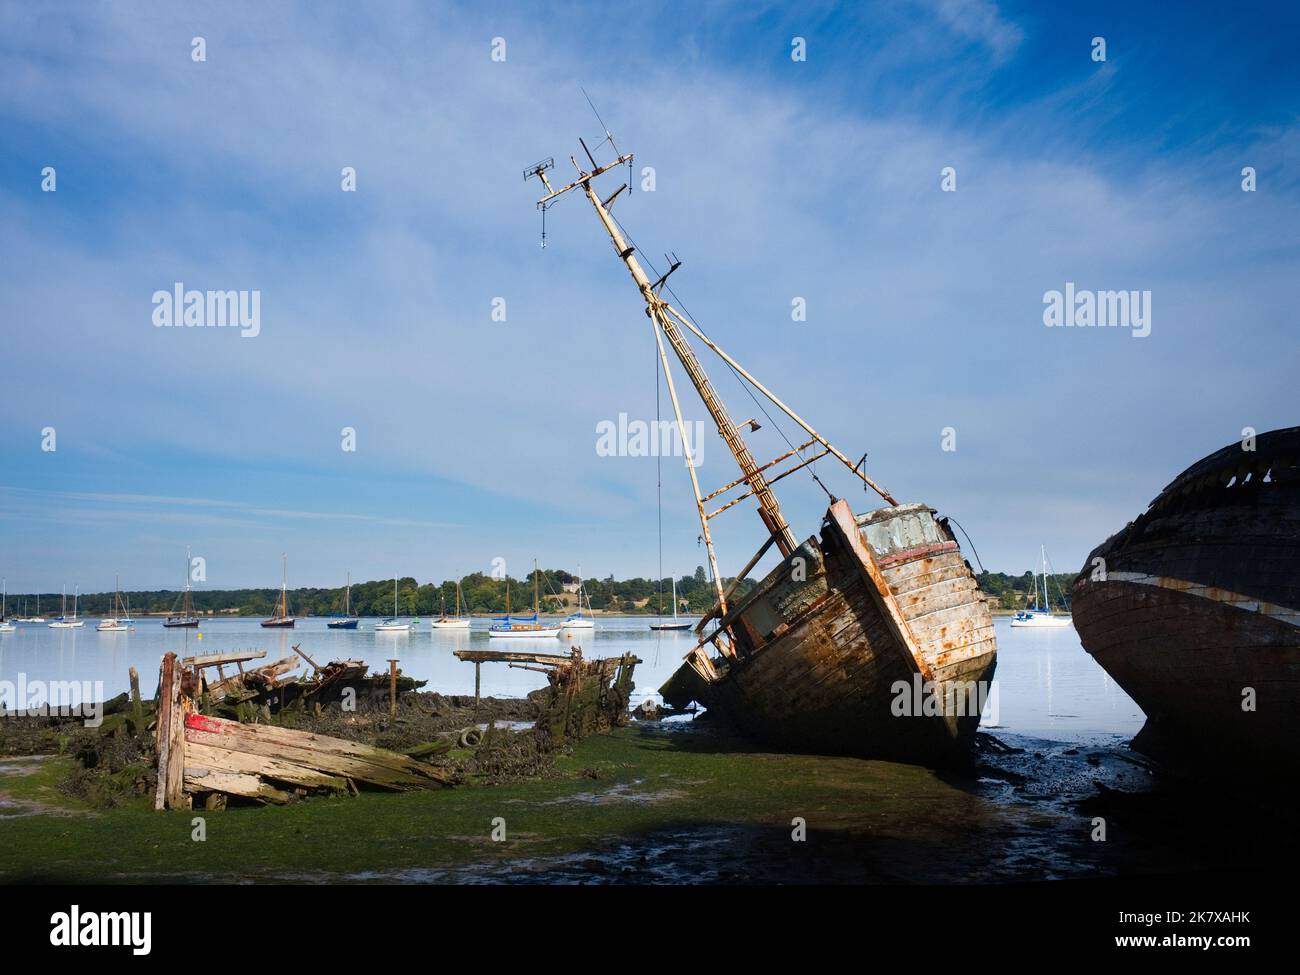 River Orwell moored boats with abandoned and wrecked wooden sailing boats on the foreshore in front Stock Photo